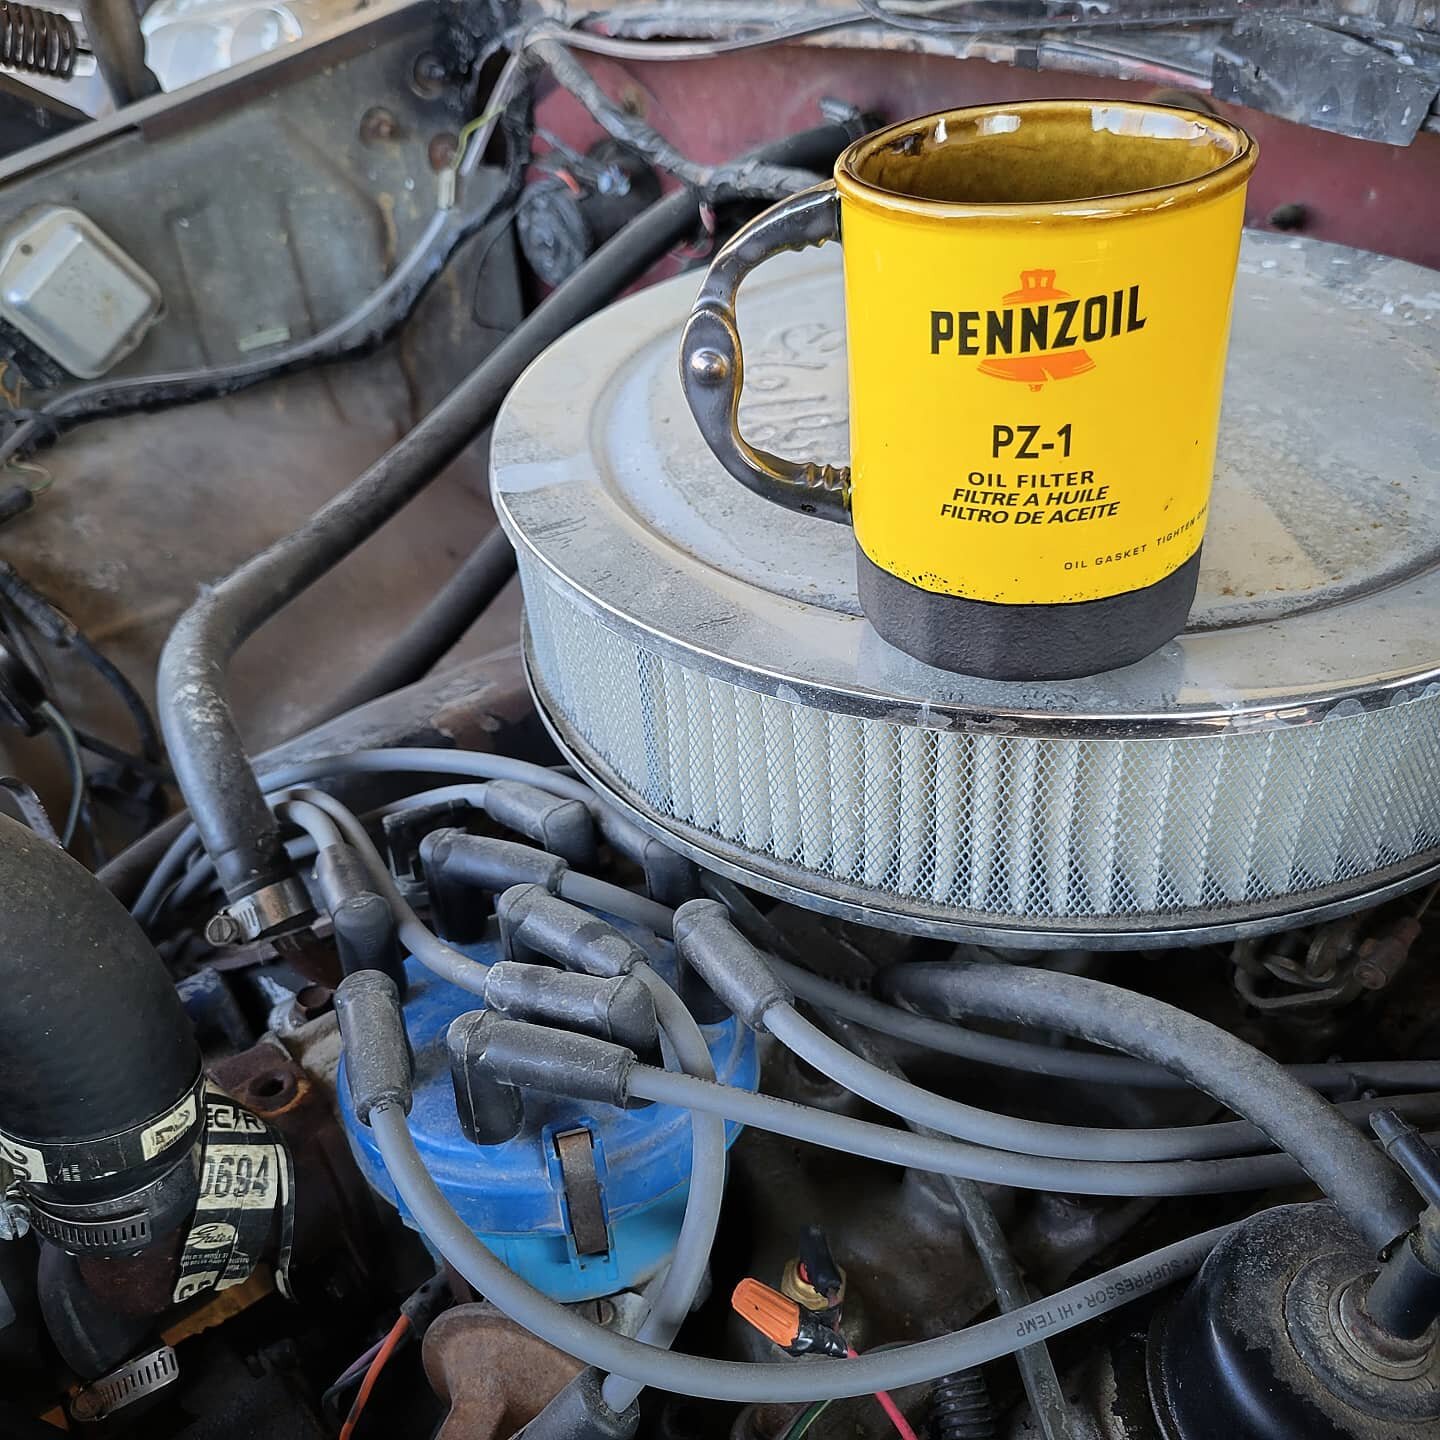 Tomorrow (Friday March 5th) at 10am CST my shop will be updated with lots of new pieces, including this brand new #Pennzoil oil filter mug. Set post notifications and sign up for my email list so you don't miss out!
.
.
.

#clay #porcelain #trompeloe